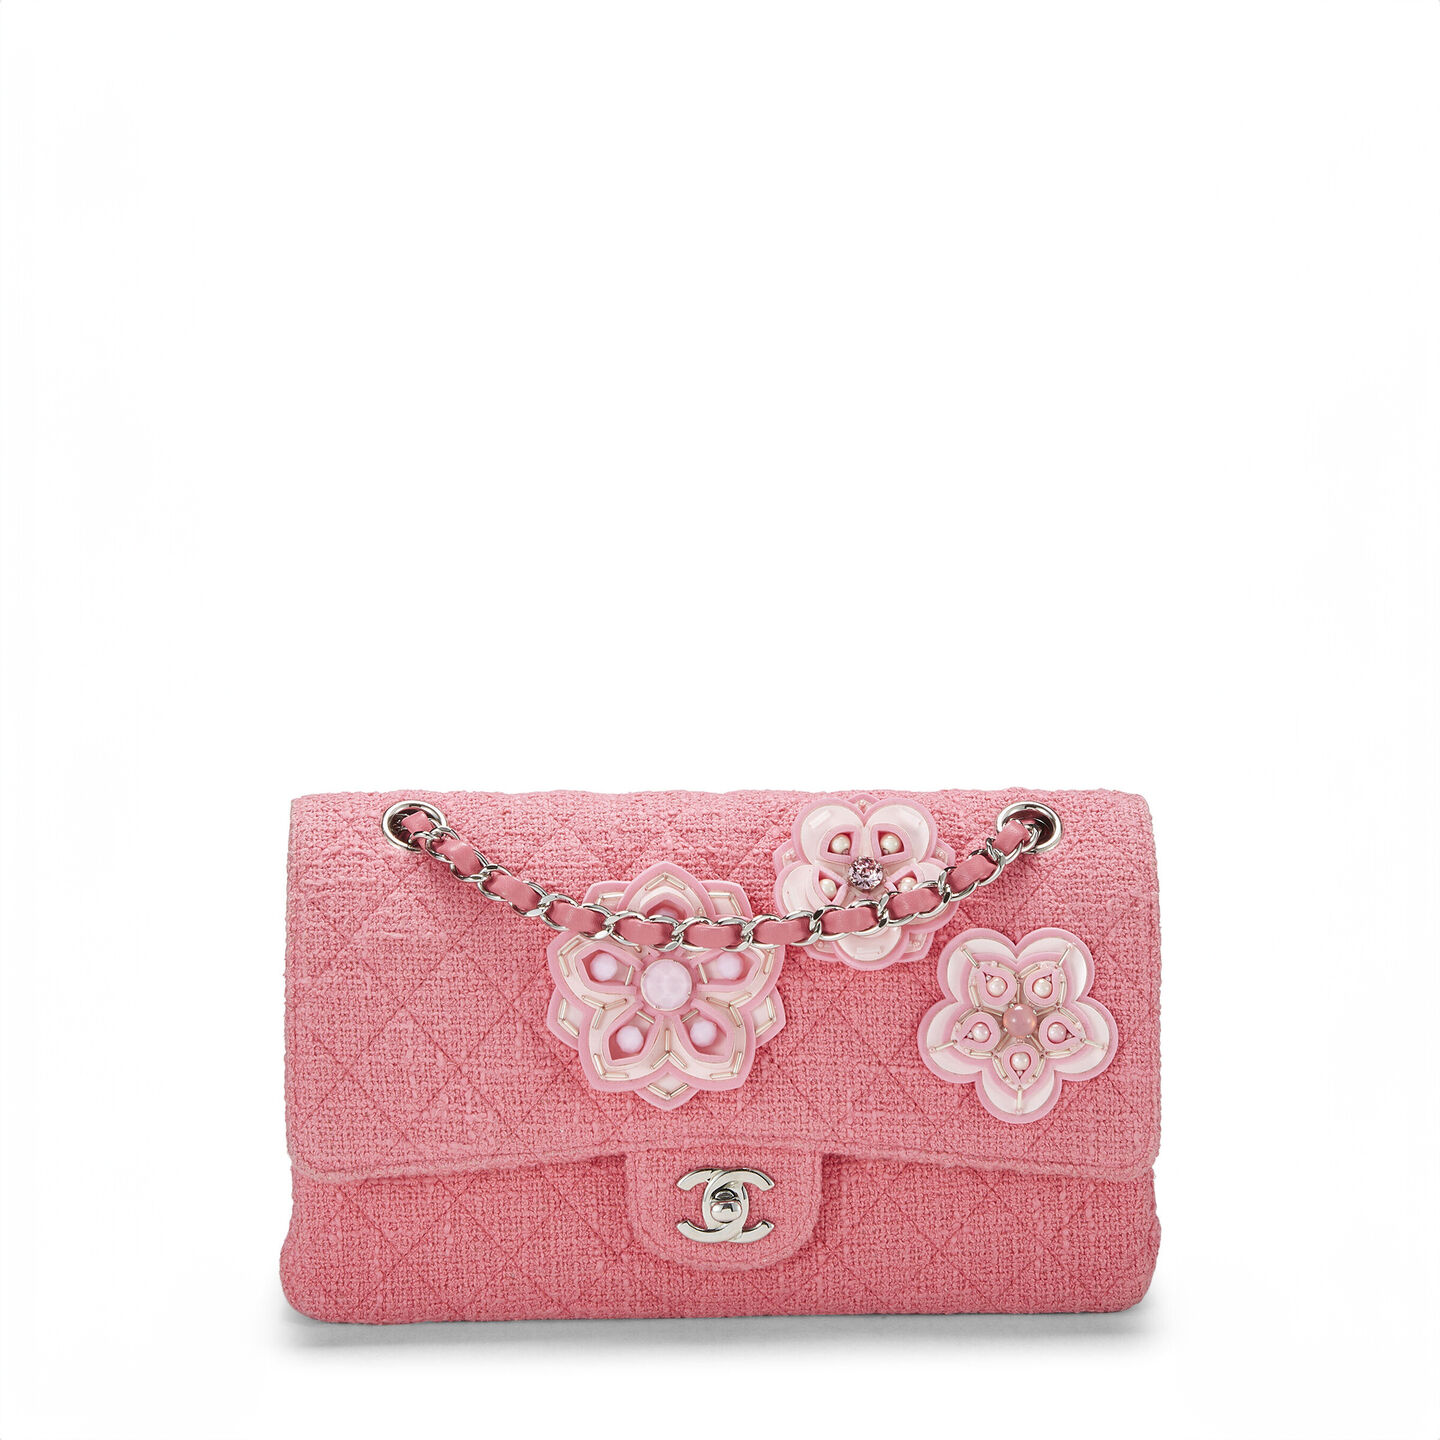 CHANEL PINK TWEED FLORAL CLASSIC DOUBLE FLAP MEDIUM